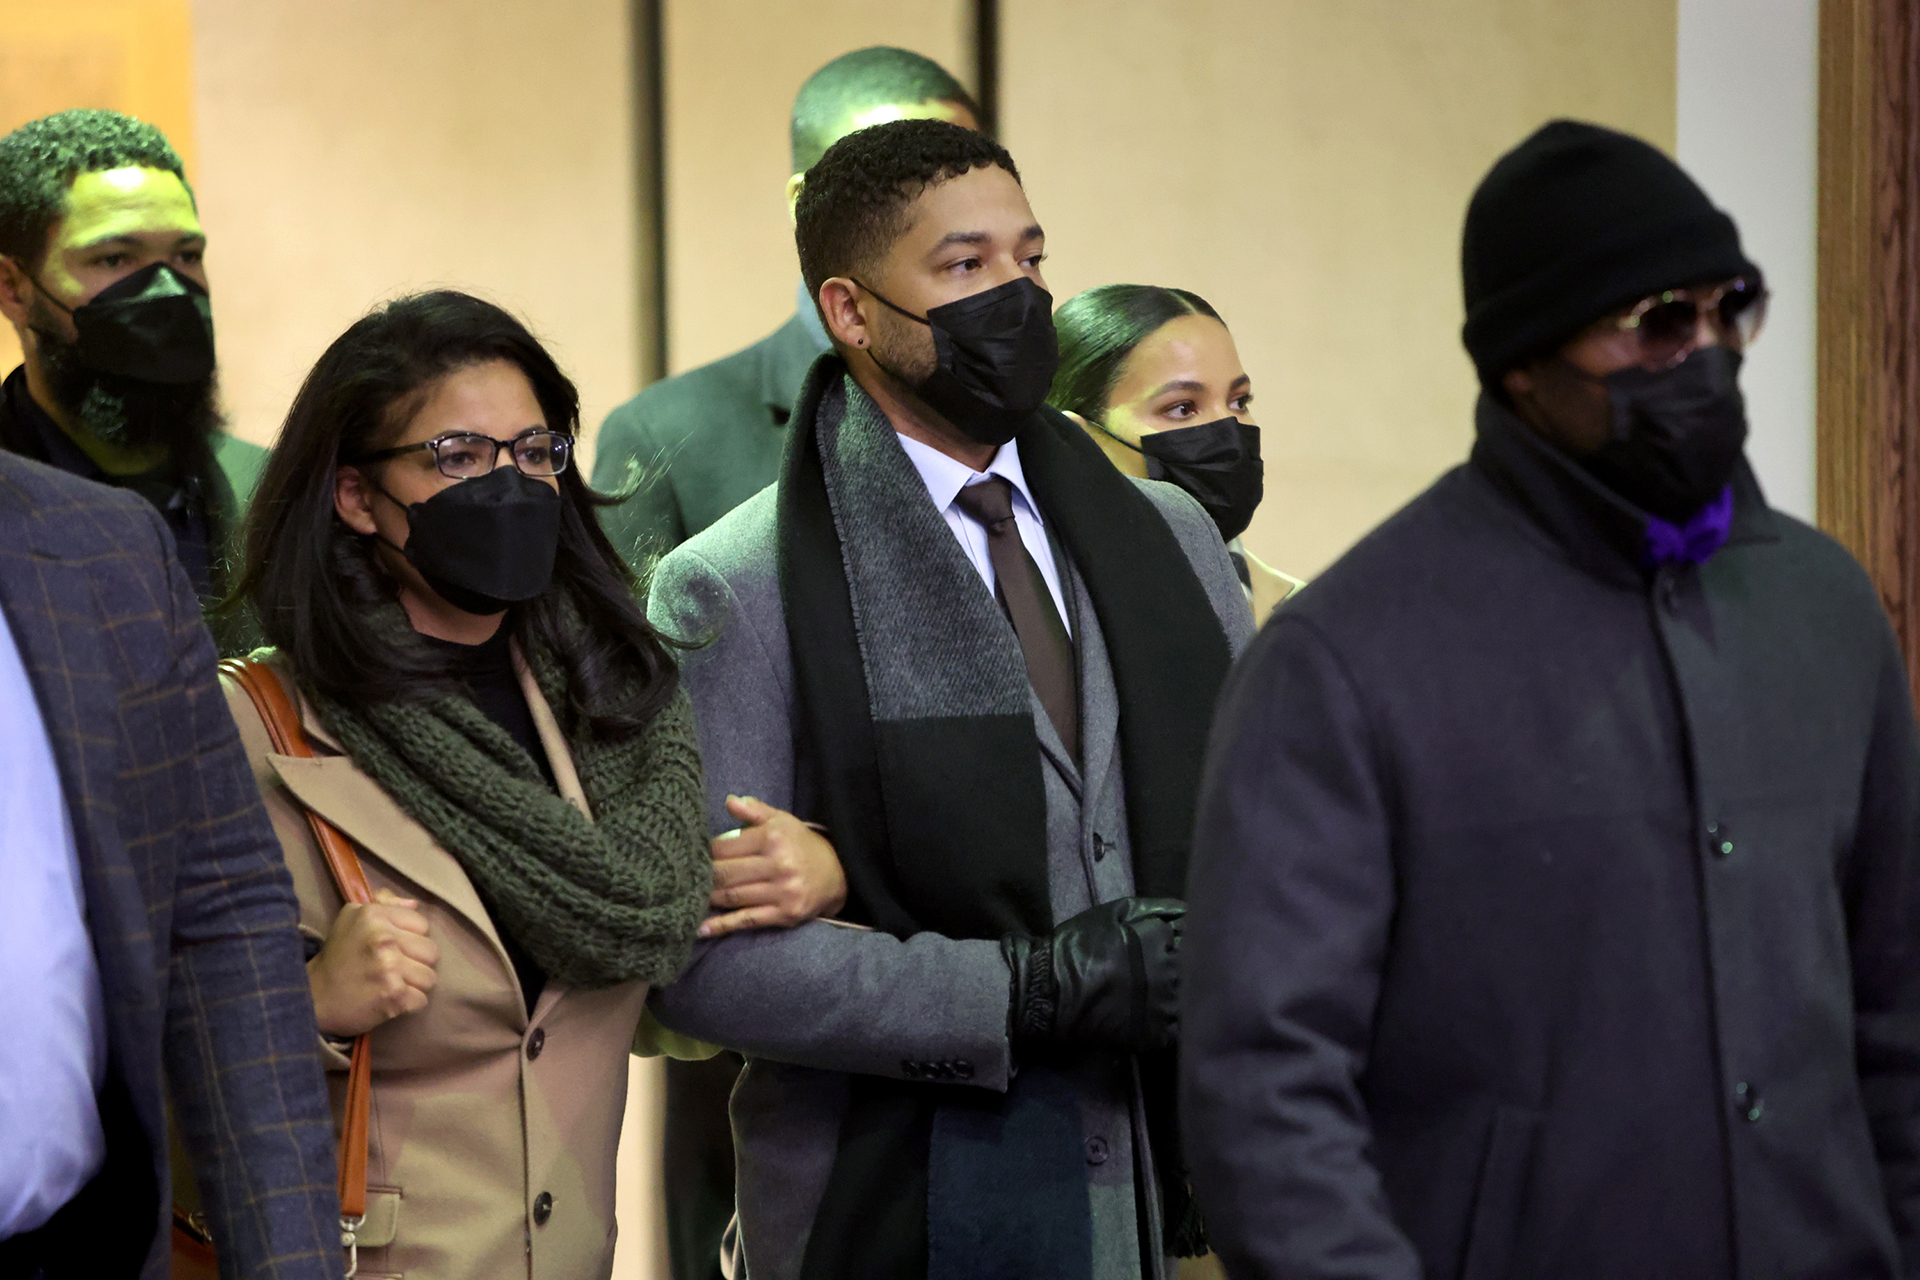 Jussie Smollett leaves the Leighton Criminal Courts Building after being found guilty